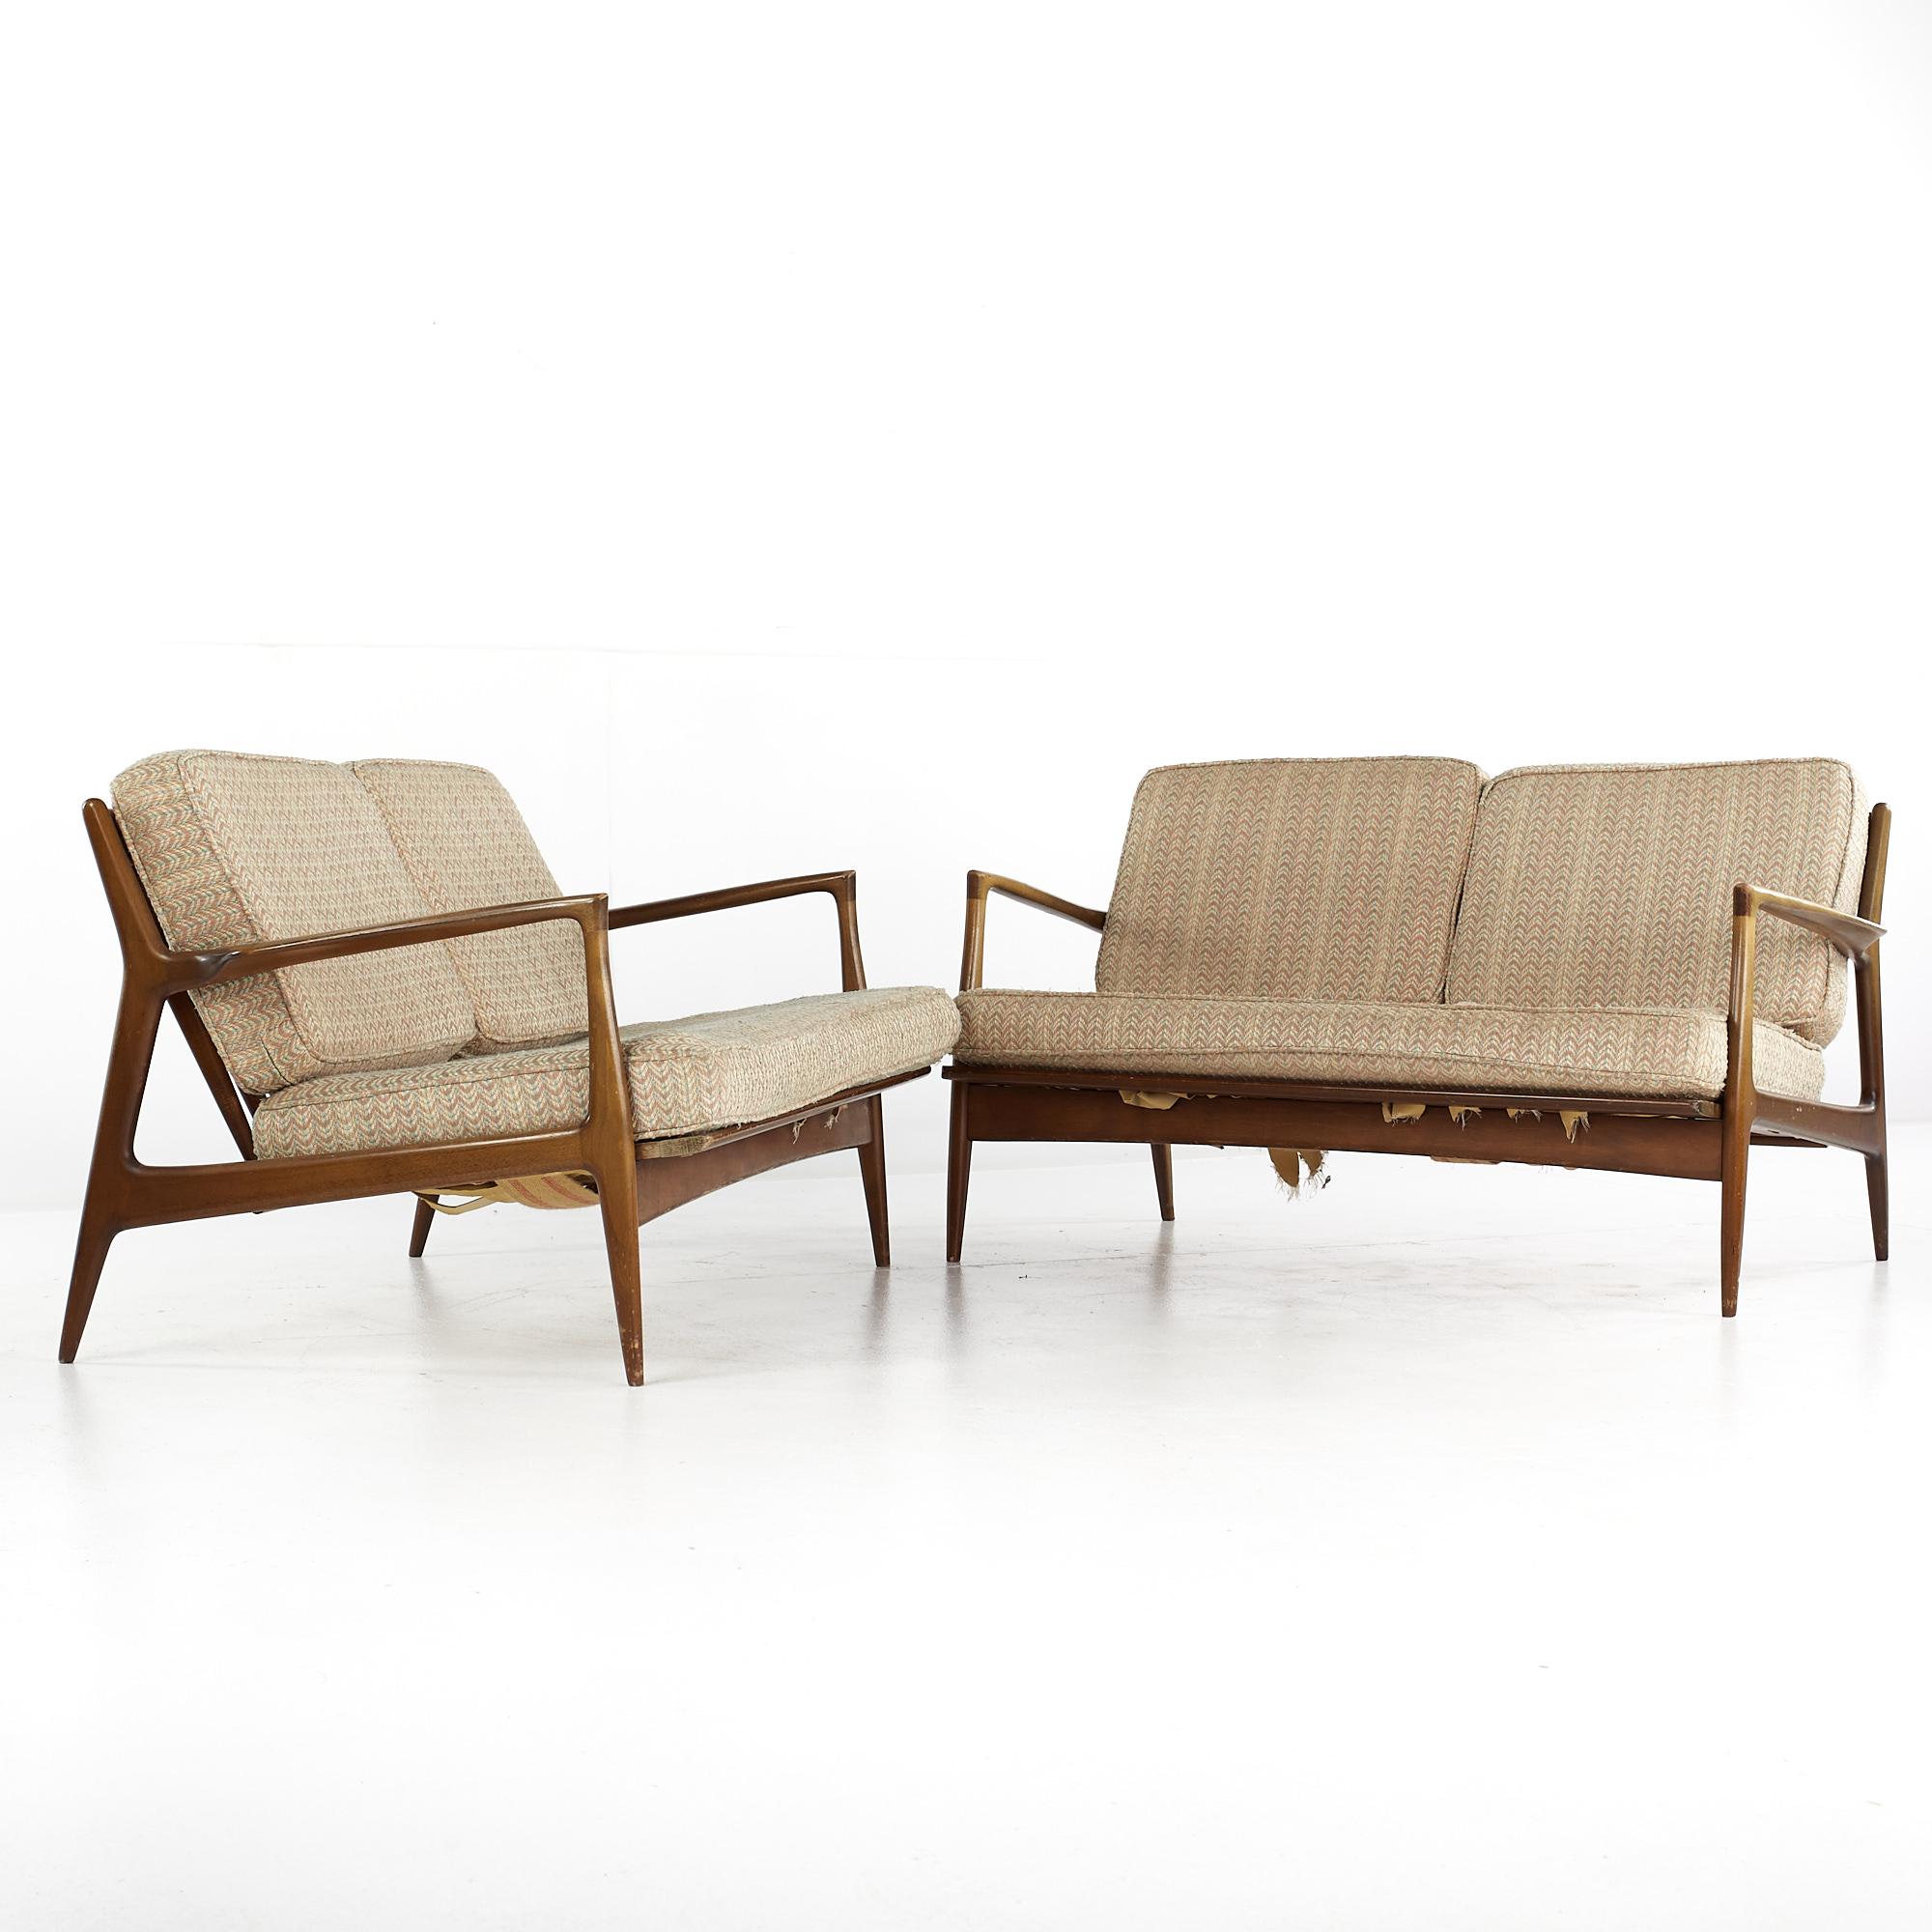 Kofod Larsen for Selig mid-century walnut settee - pair.

Each settee measures: 53 wide x 32 deep x 29 inches high, with a seat height of 16 and arm height of 22.75 inches

All pieces of furniture can be had in what we call restored vintage